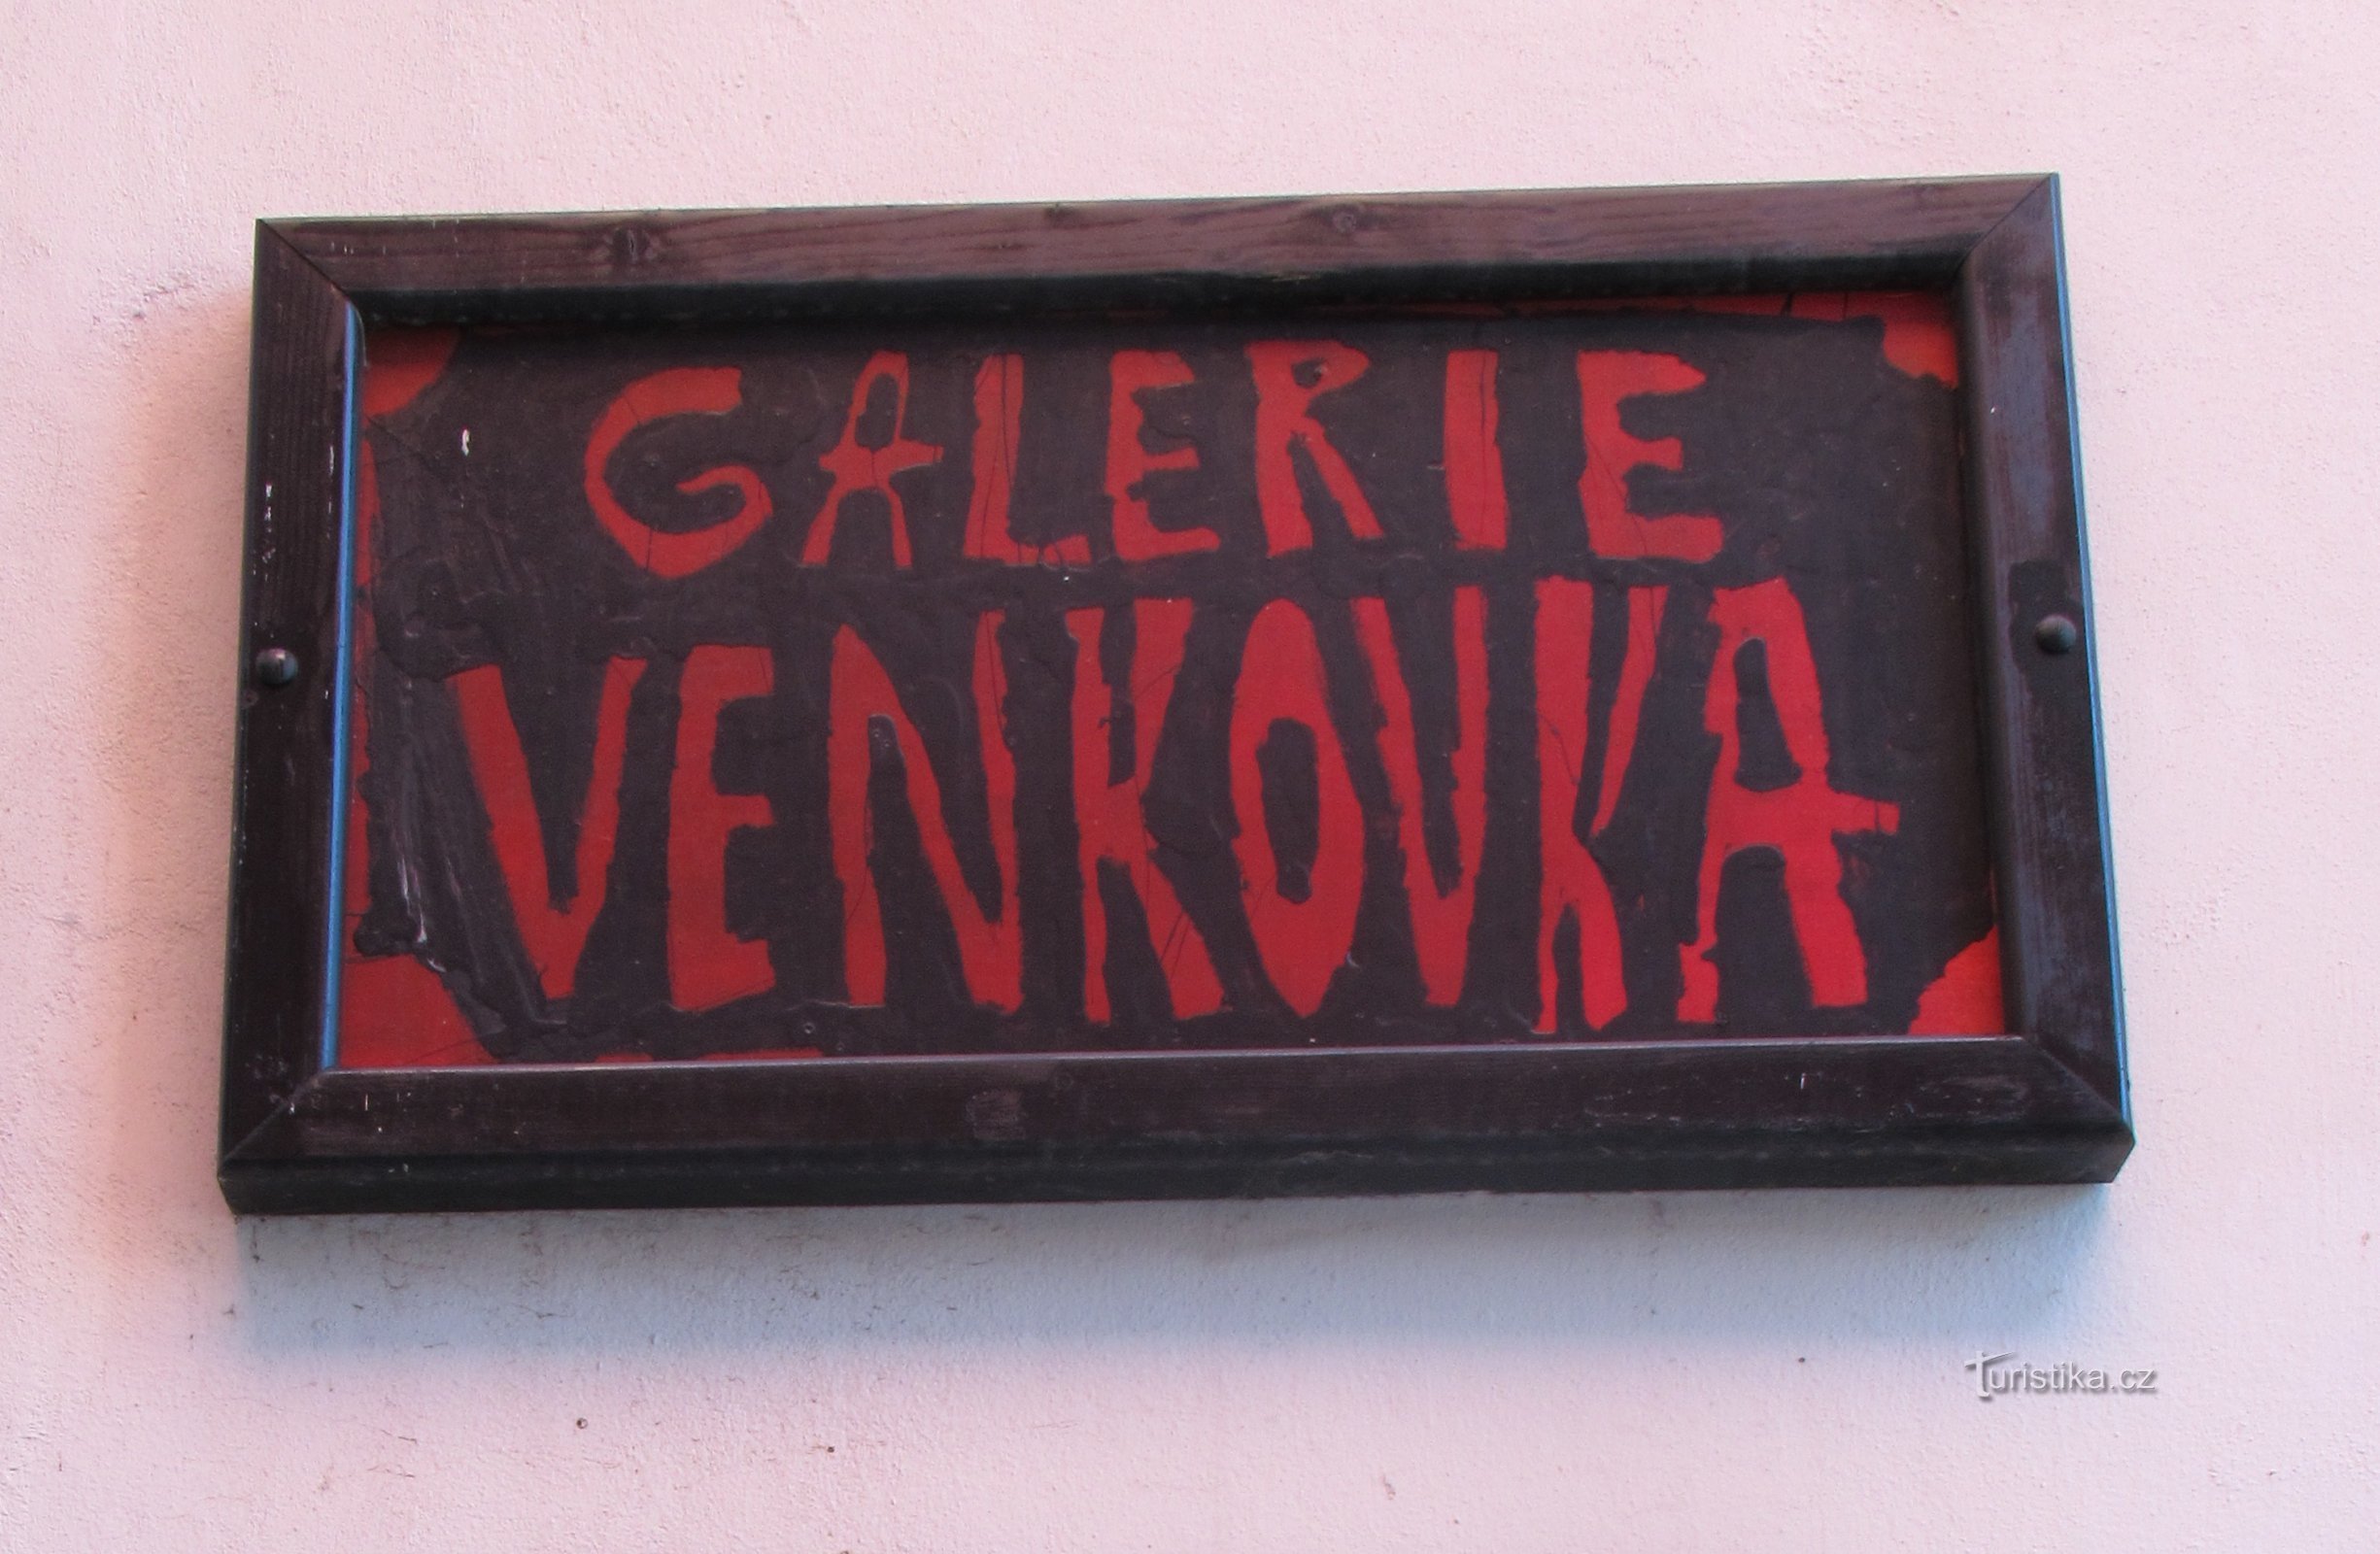 Svitavská Venkovka - or paintings in the streets of the city